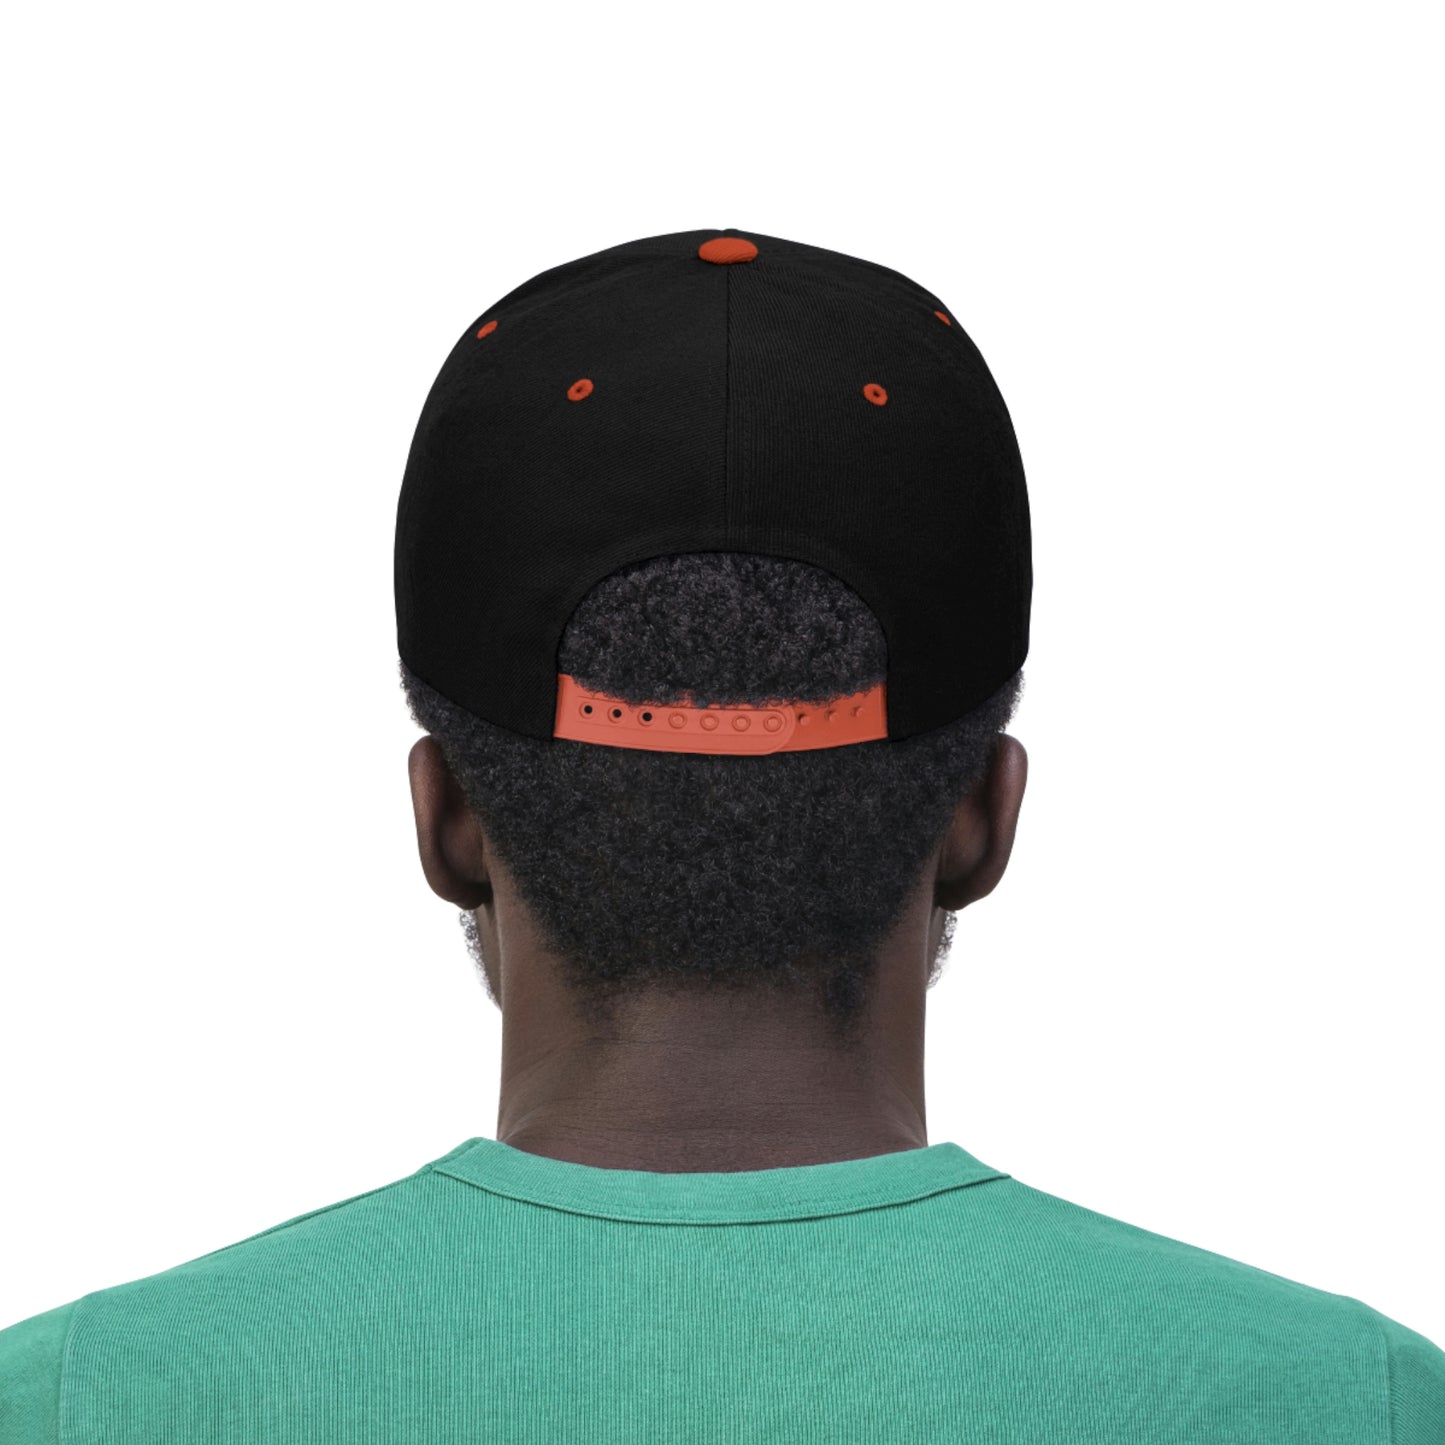 Rave after Rave - Embroidery Logo - Unisex Hat